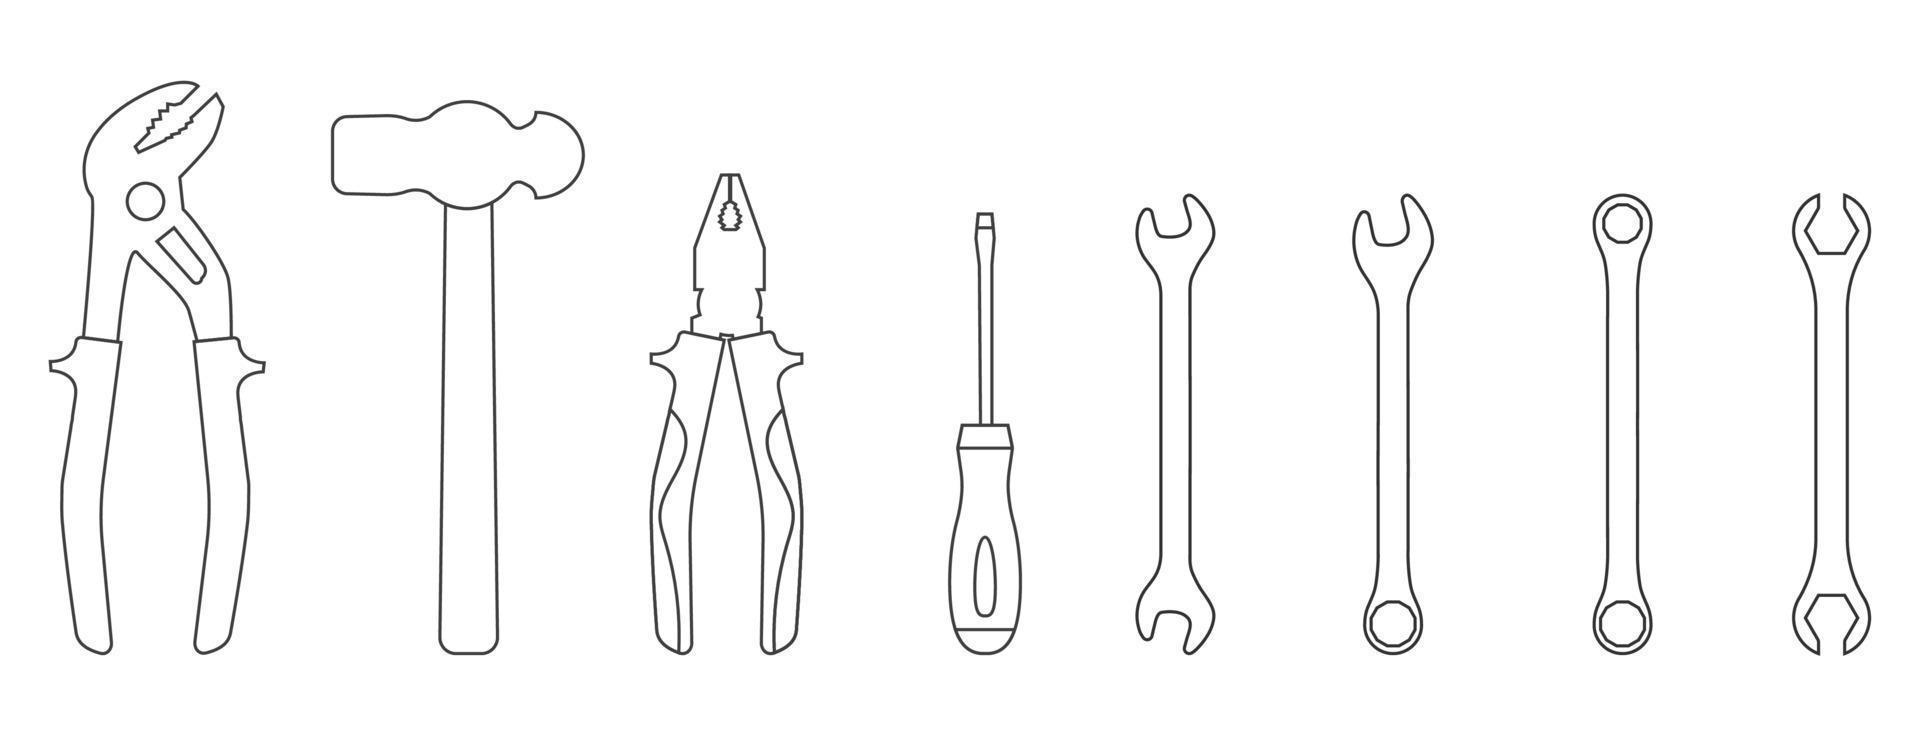 Set of line style icons of tools. Wrench, screwdriver, pliers, hammer. Workshop, mechanic, repair service logo template. Clean and modern vector illustration.